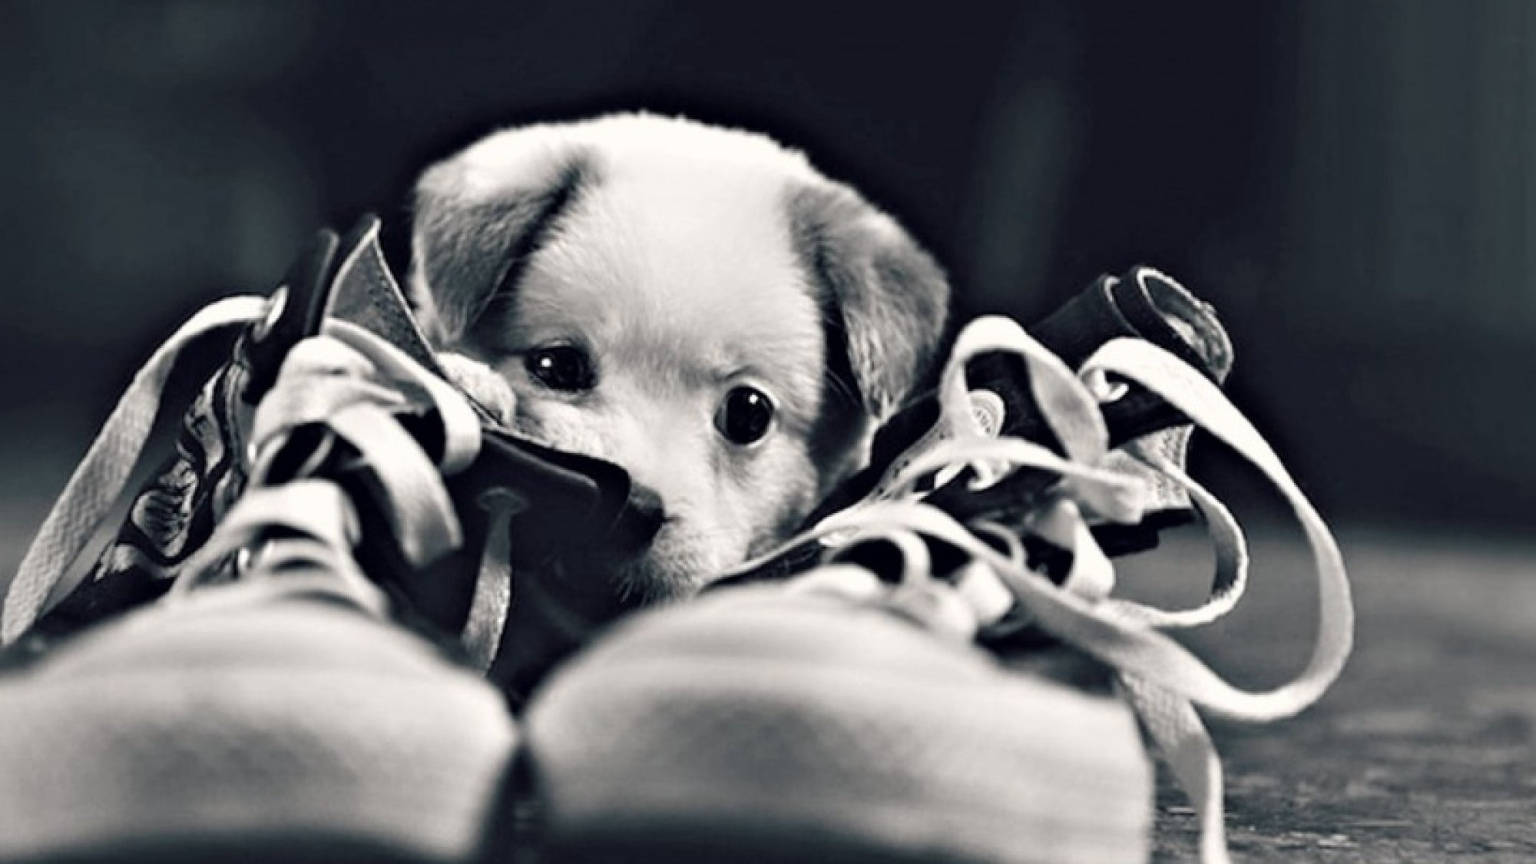 Cute Black And White Puppy Sneakers Wallpaper